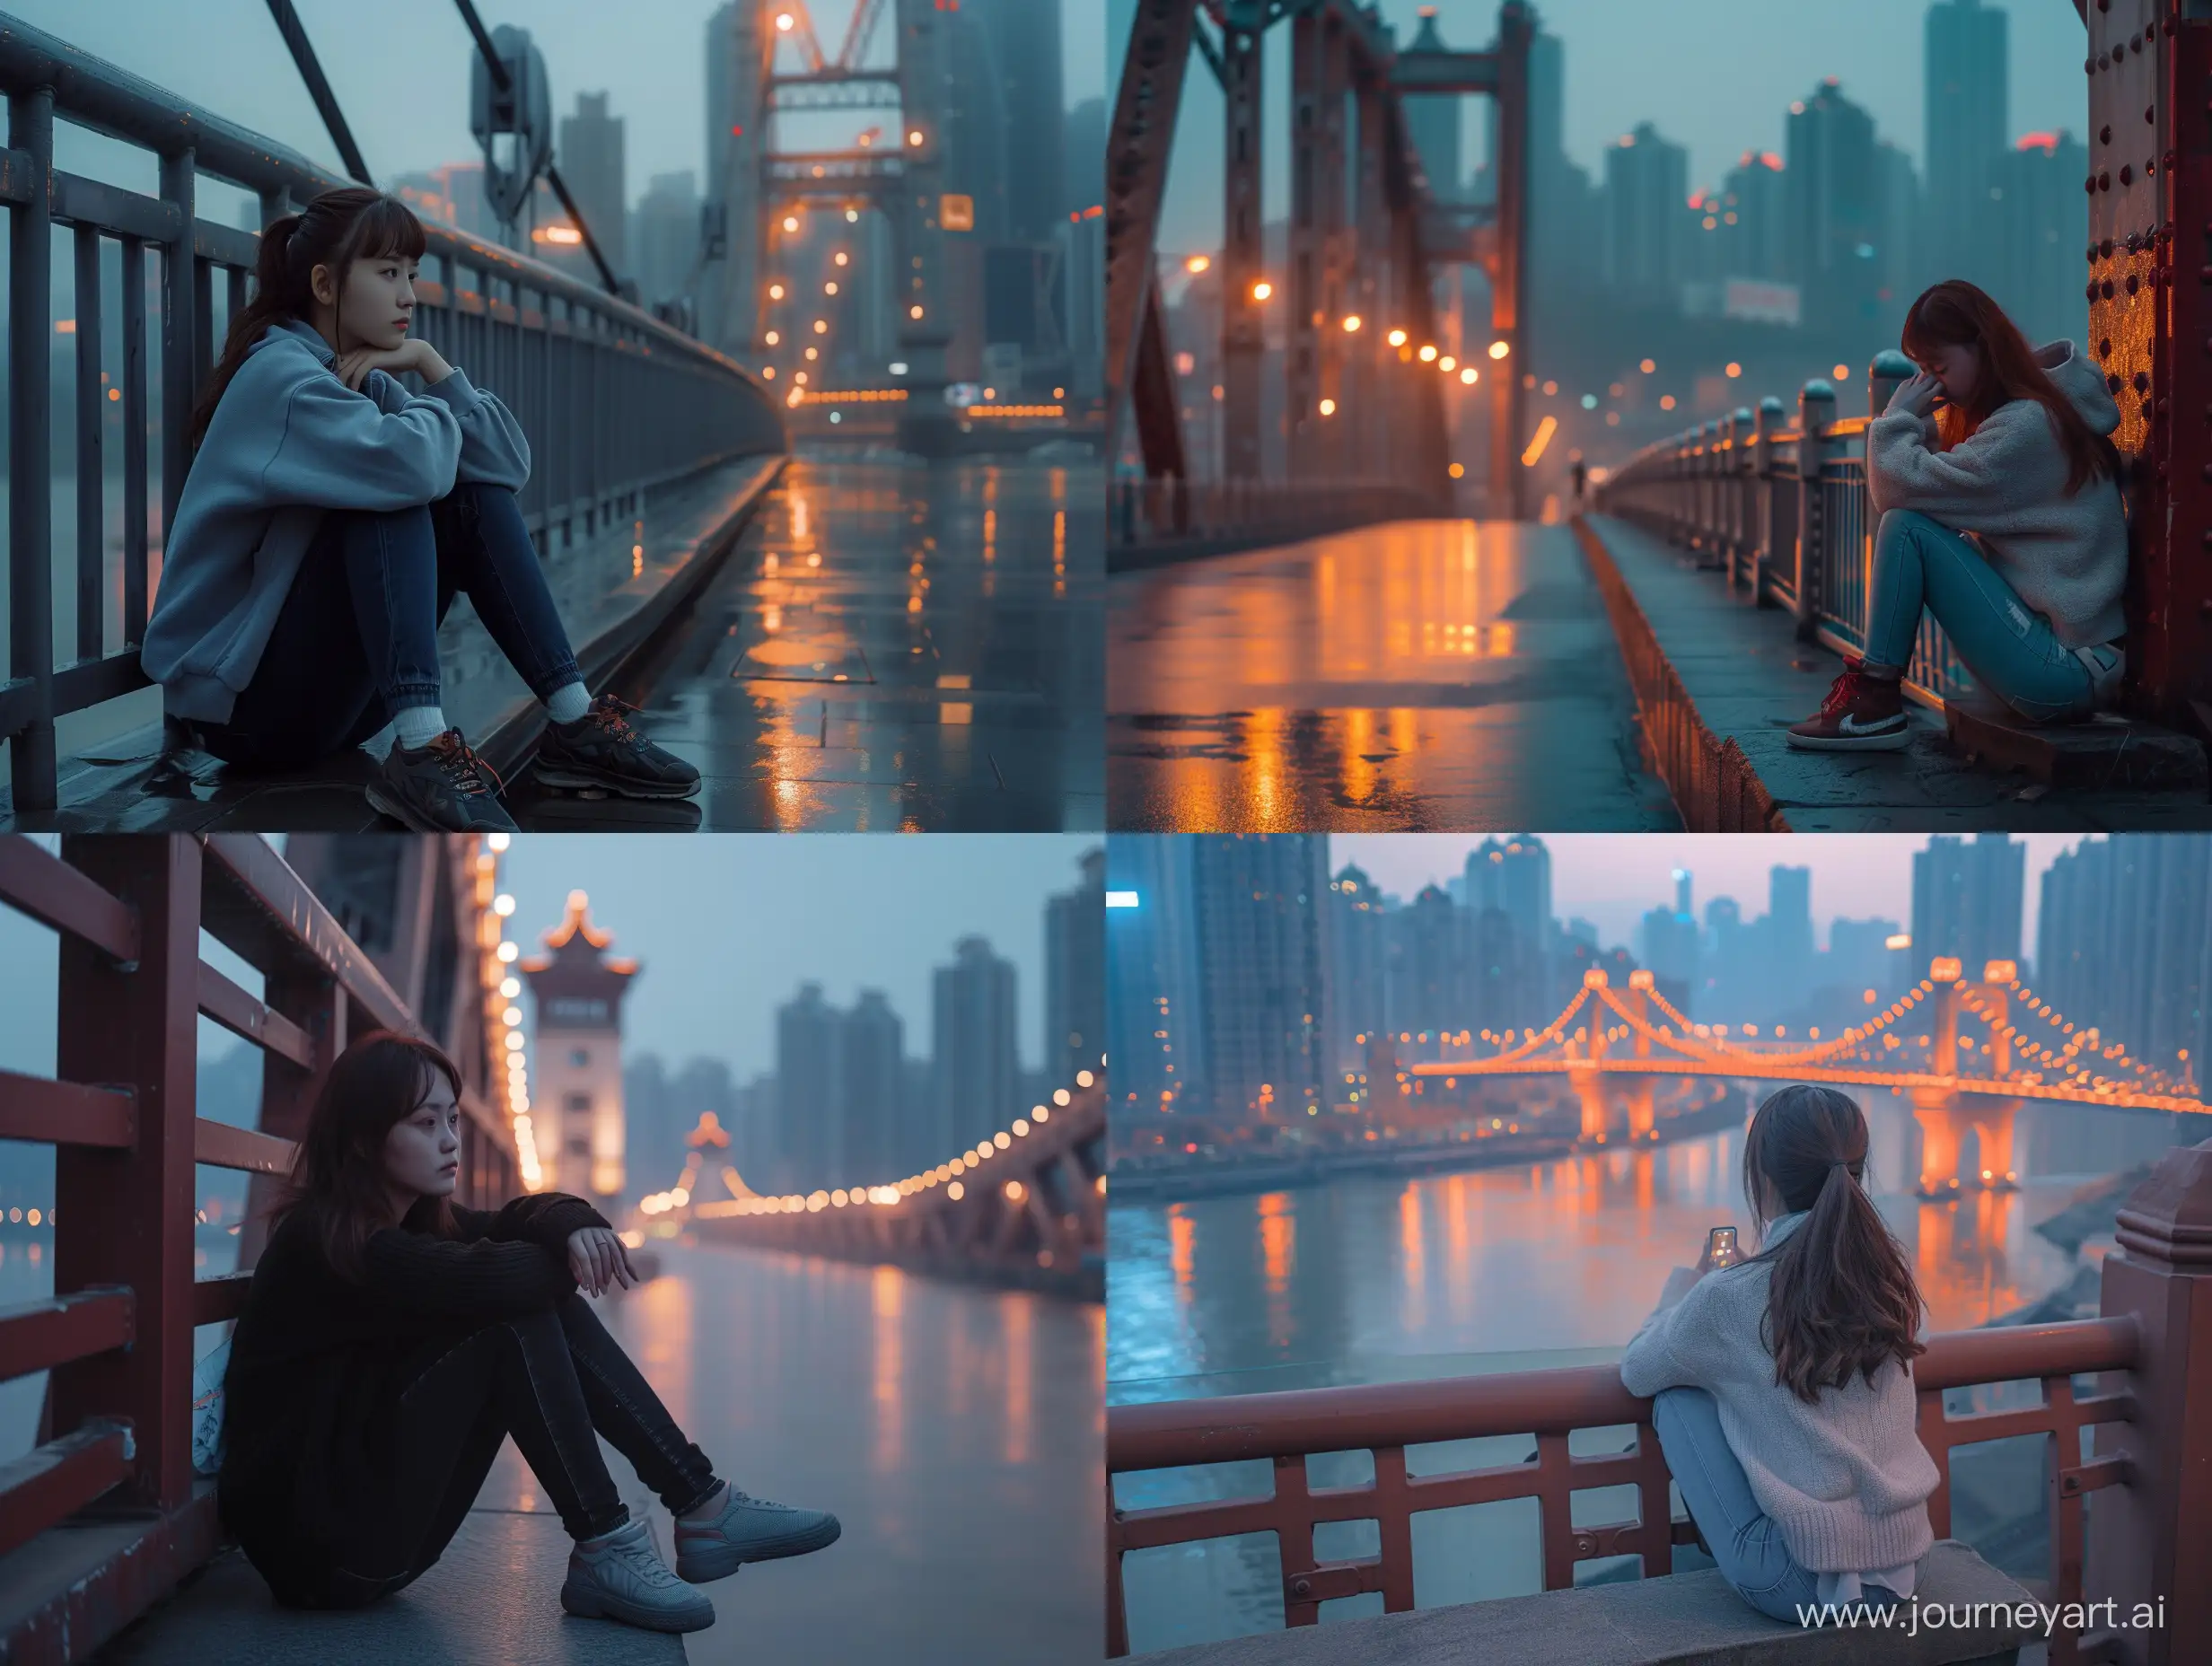 a phone photo of a women sitting on the bridge, Chongqing China city, soft lighting, style raw posted on reddit in 2019,